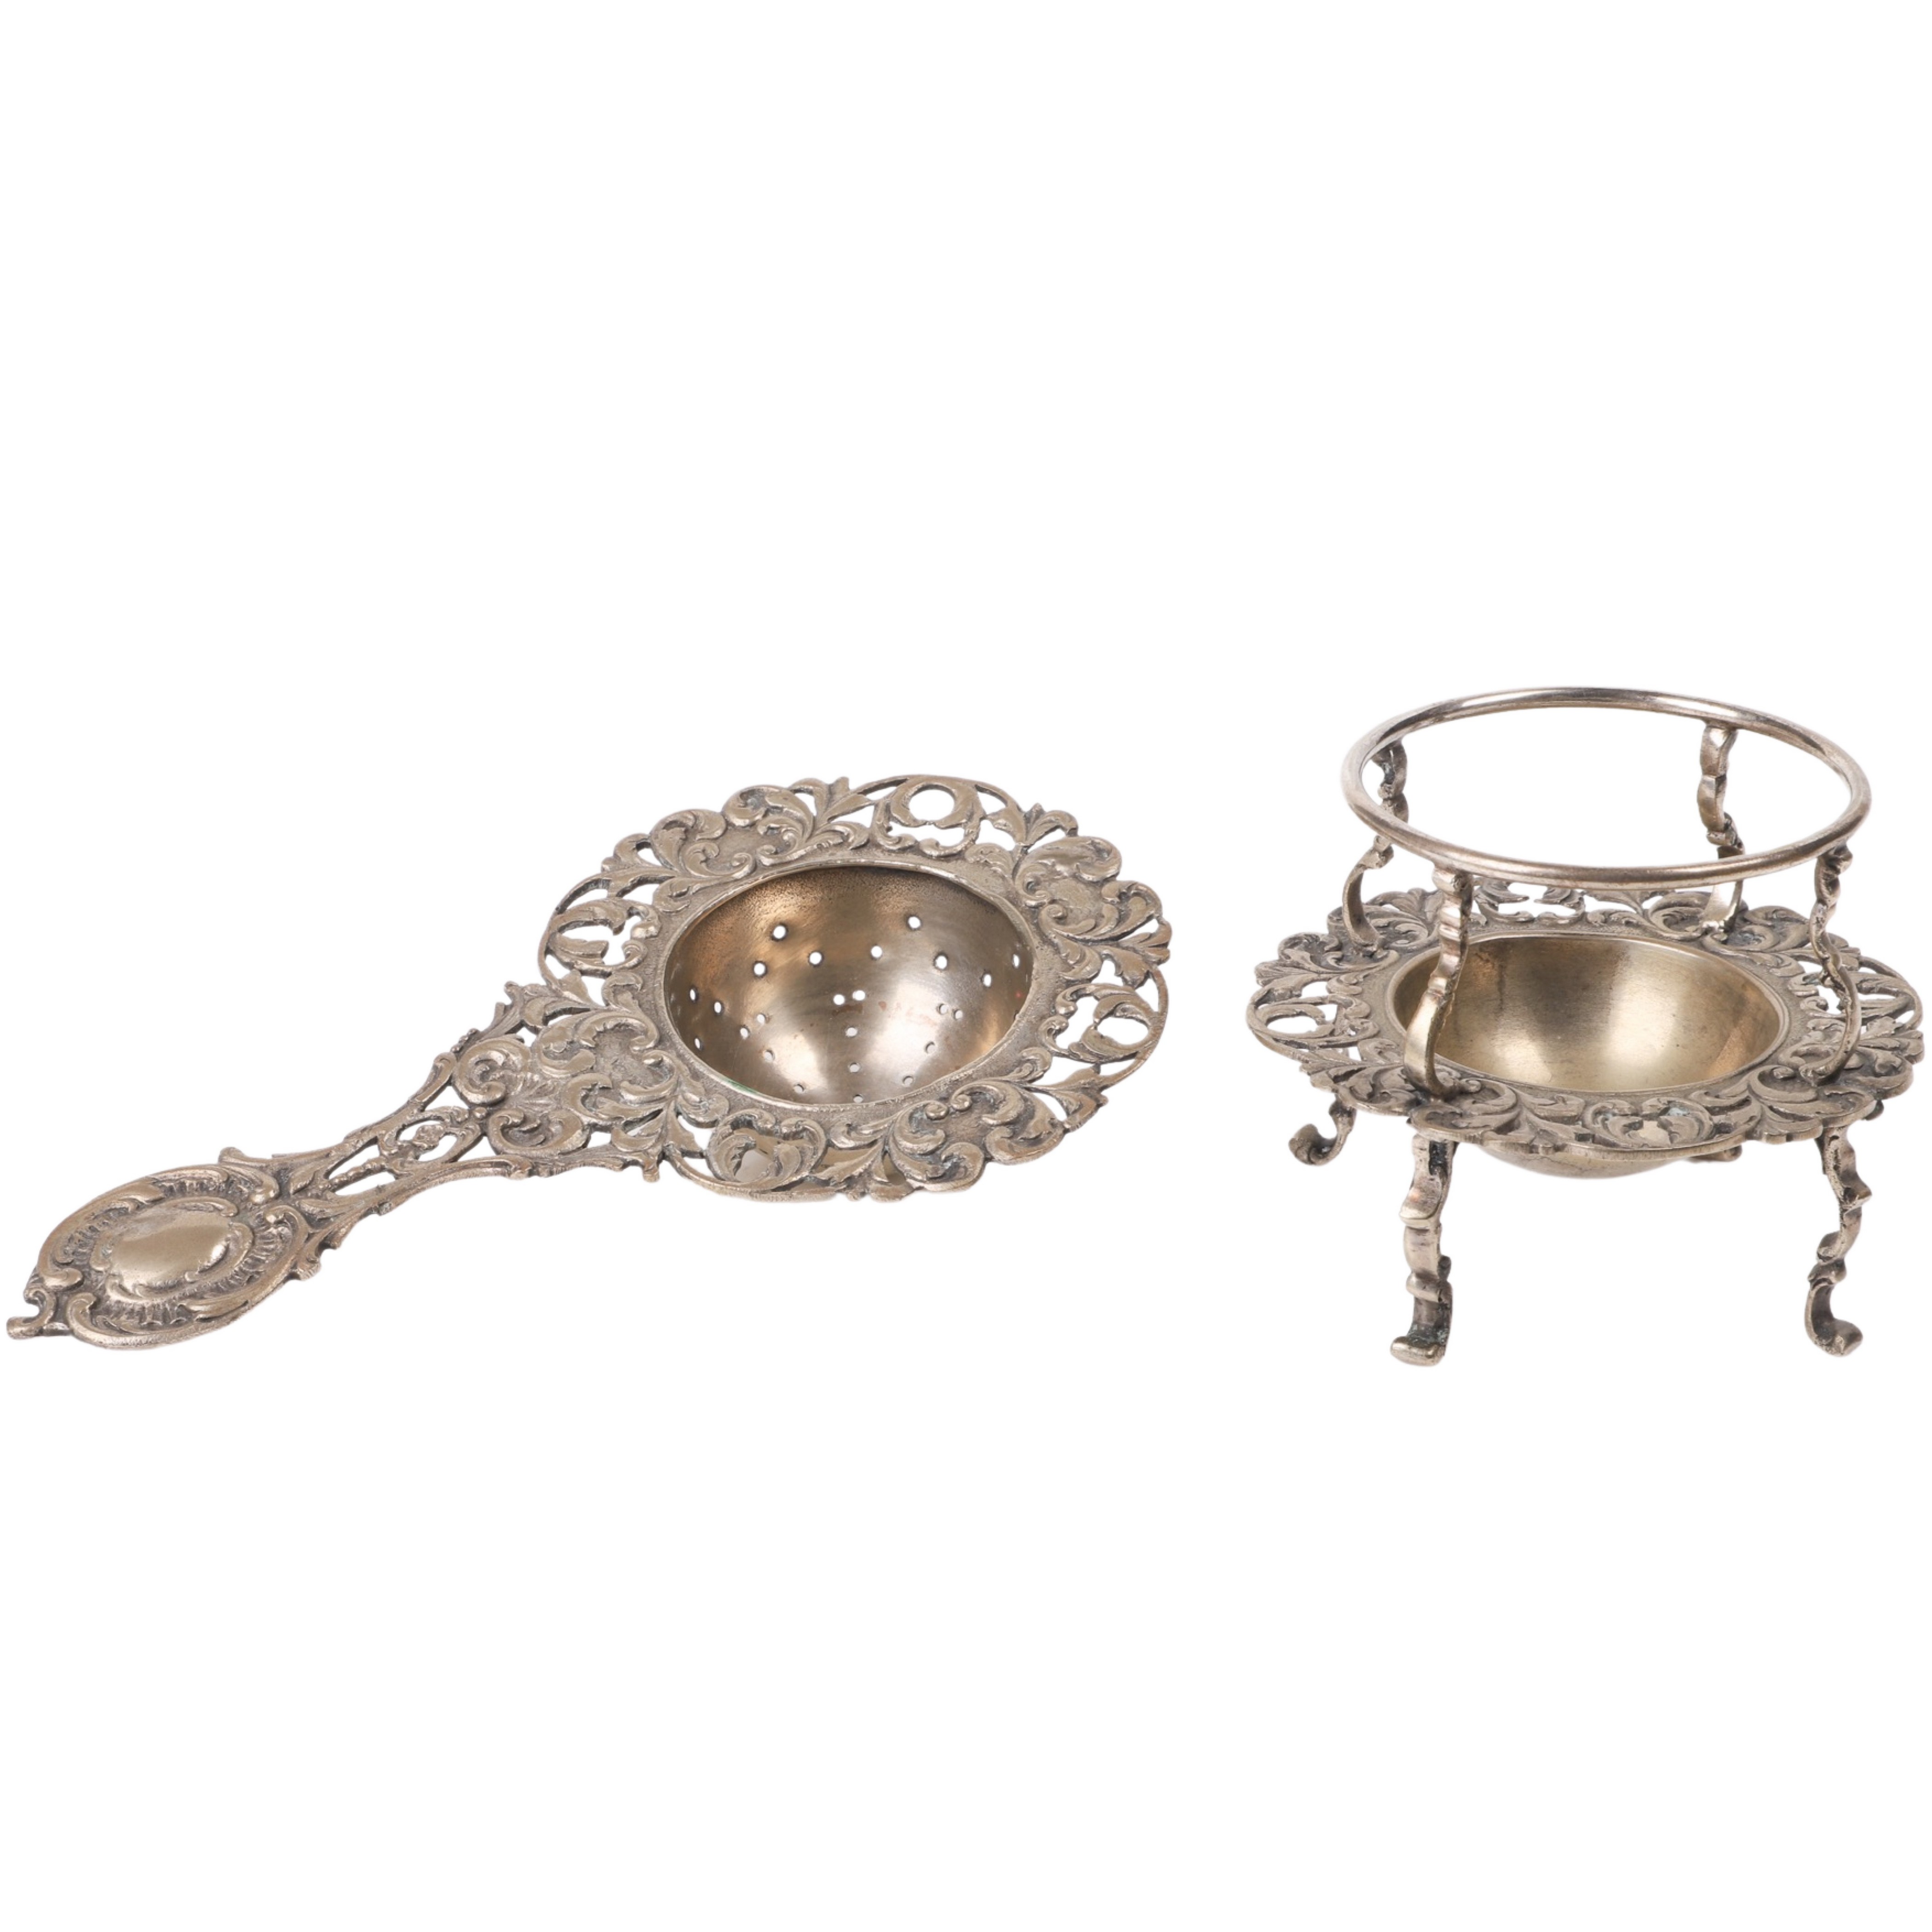 German silver tea strain and stand  30fea2